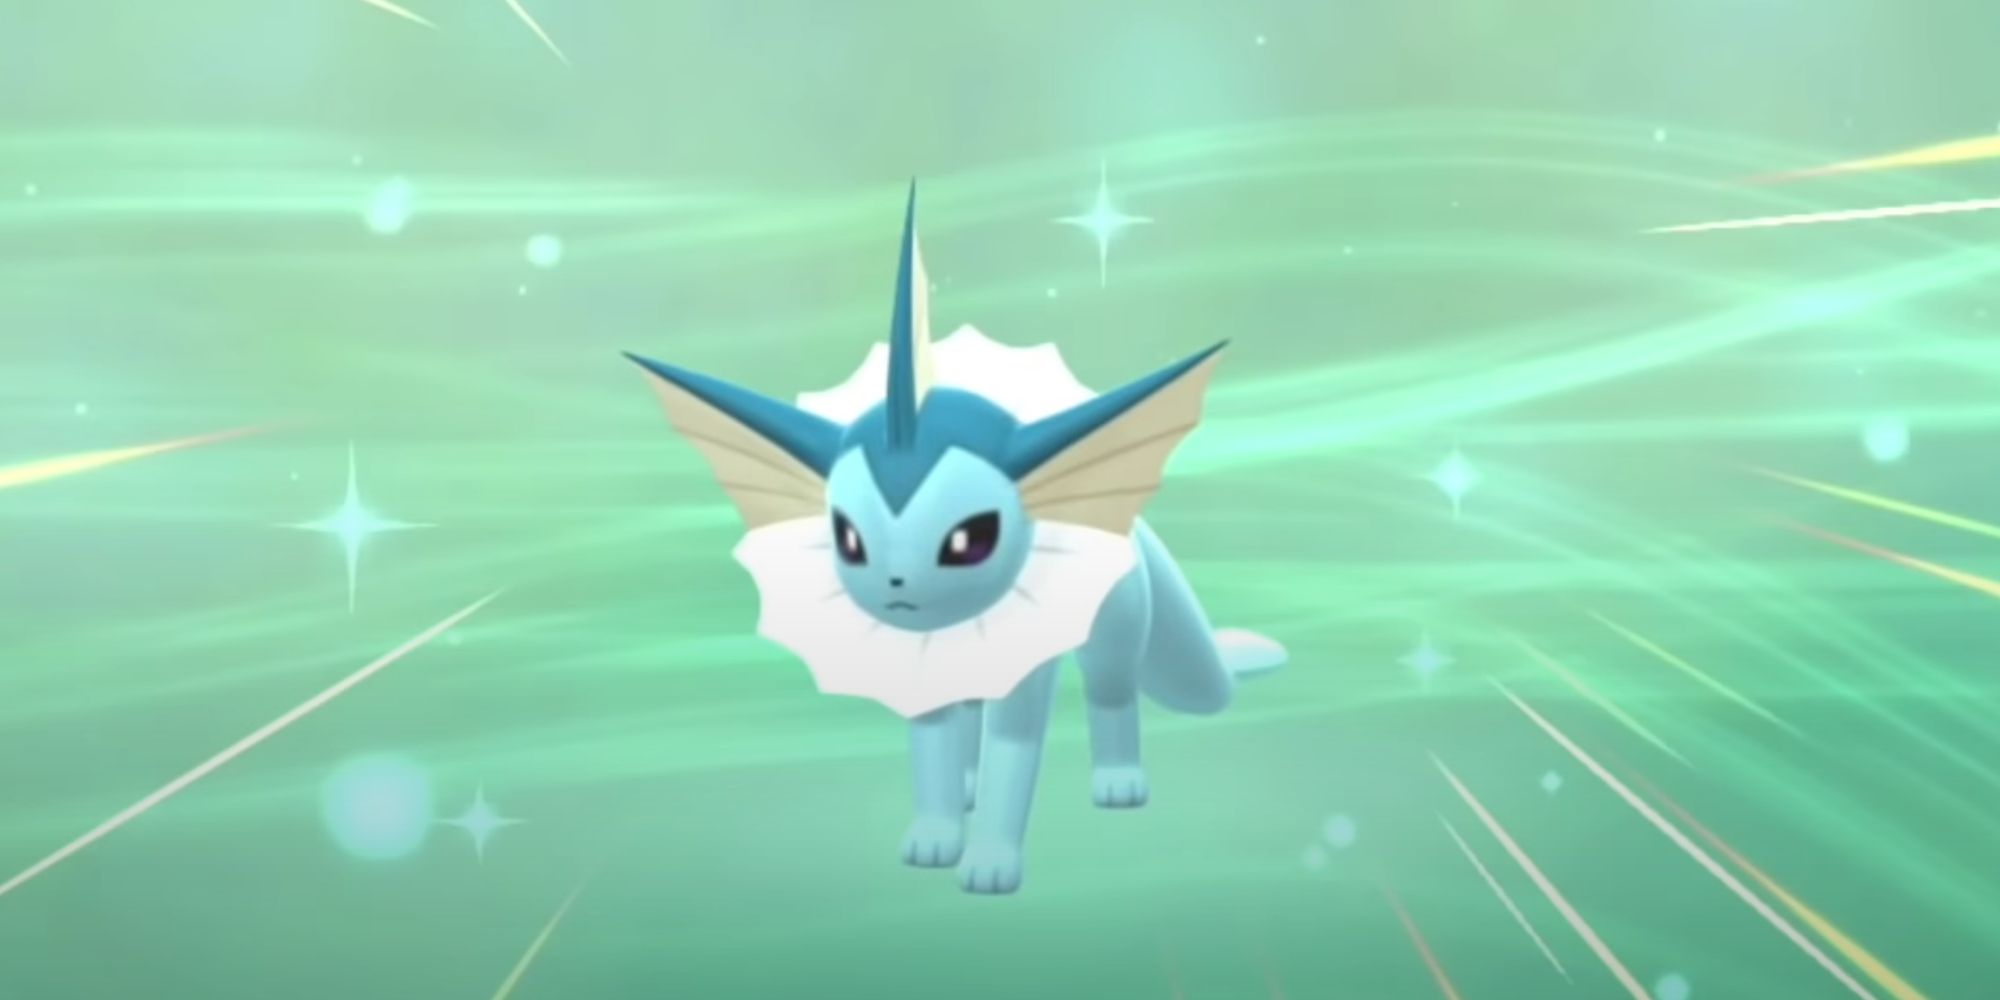 Vaporeon evolves when players use a Water Stone on Eevee in Pokemon Brilliant Diamond and Shining Pearl.